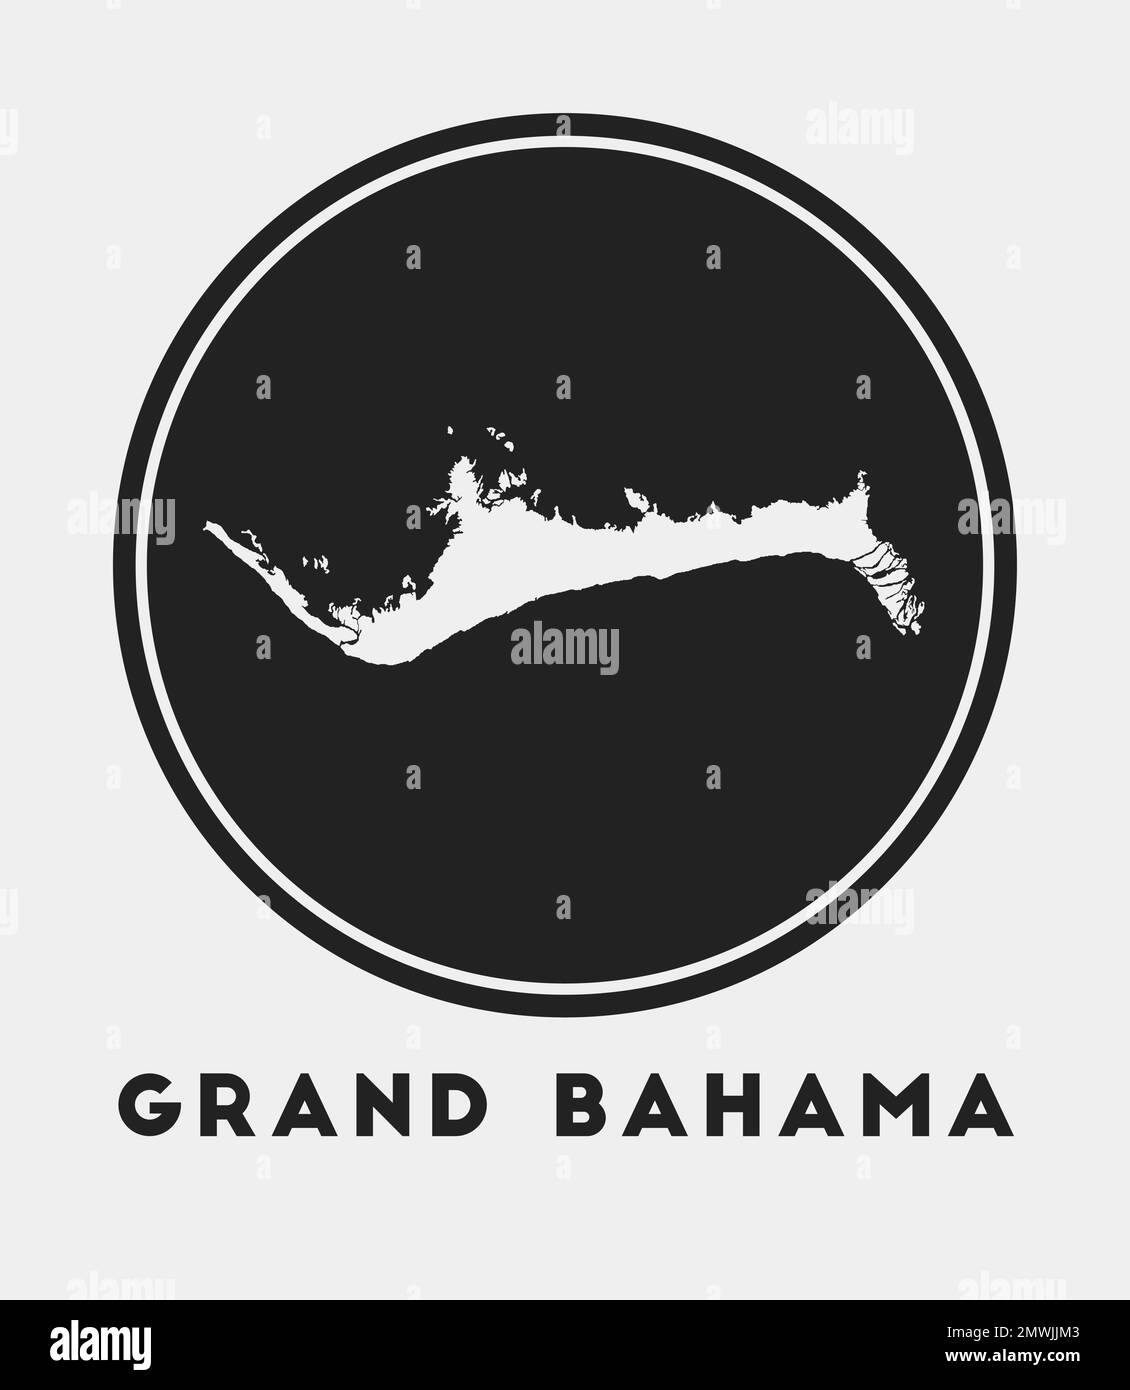 Grand Bahama icon. Round logo with island map and title. Stylish Grand Bahama badge with map. Vector illustration. Stock Vector